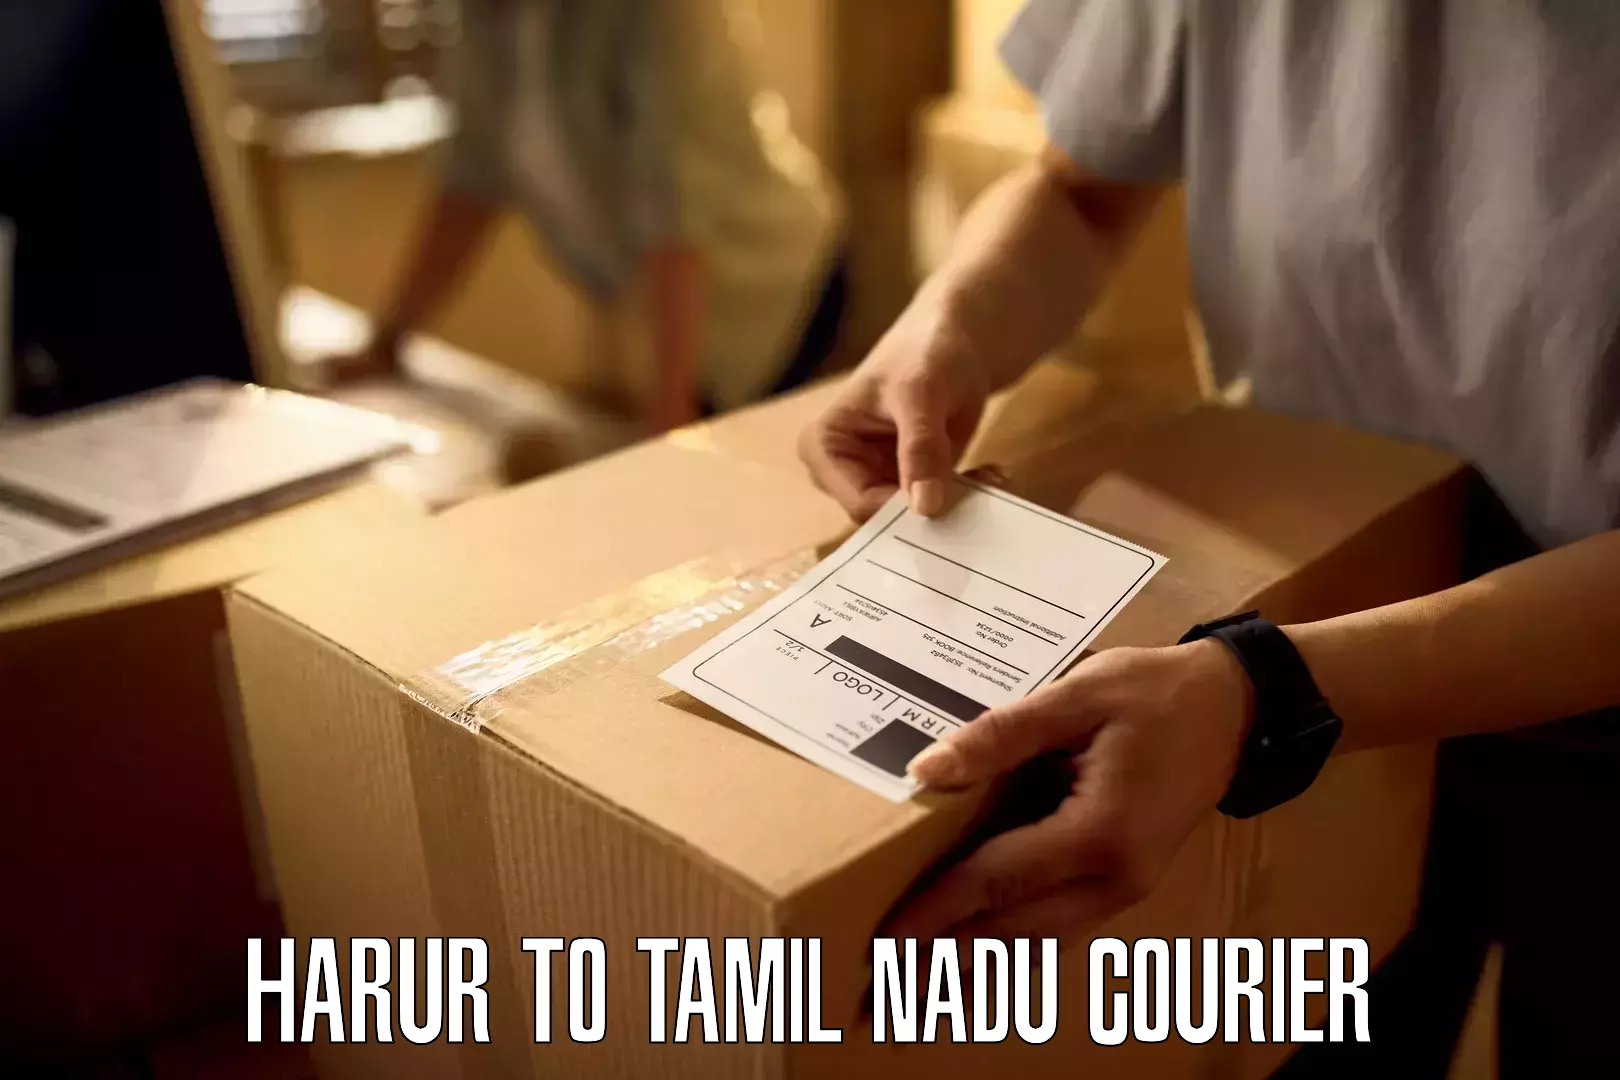 Full-service courier options Harur to Chennai Port